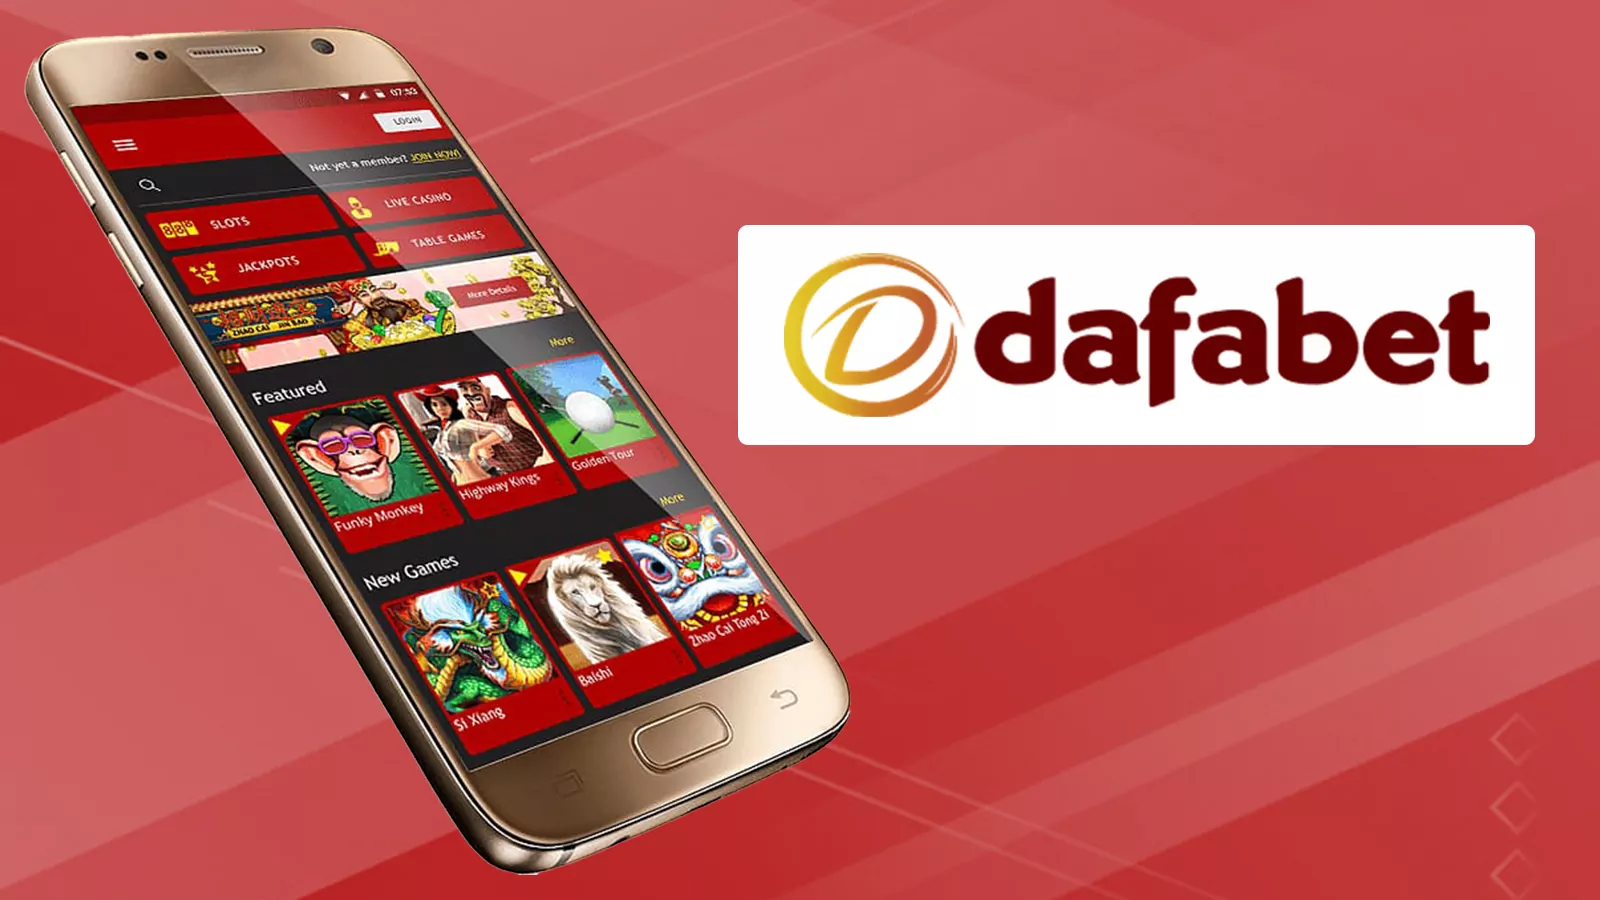 Download the mobile app and sign up for Dafabet.